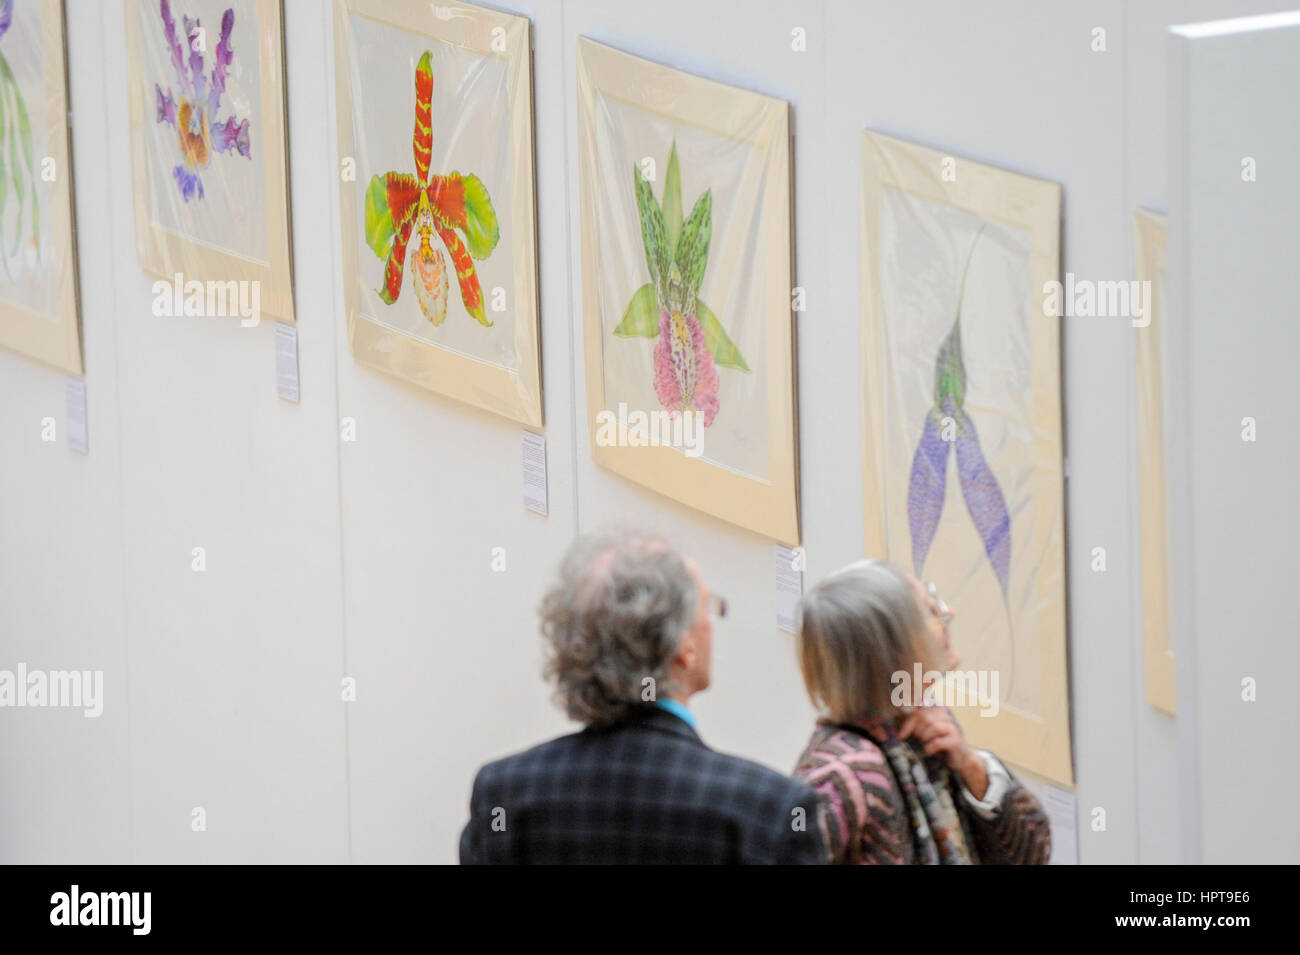 London, UK. 24th Feb, 2017. Members of the public view the work of some of the world's best botanical artists through a display of previously unseen work at the RHS London Botanical Art Show. Taking place this weekend, the show features artists from the UK and internationally including USA, Italy, Japan, New Zealand and South Korea. Credit: Stephen Chung/Alamy Live News Stock Photo